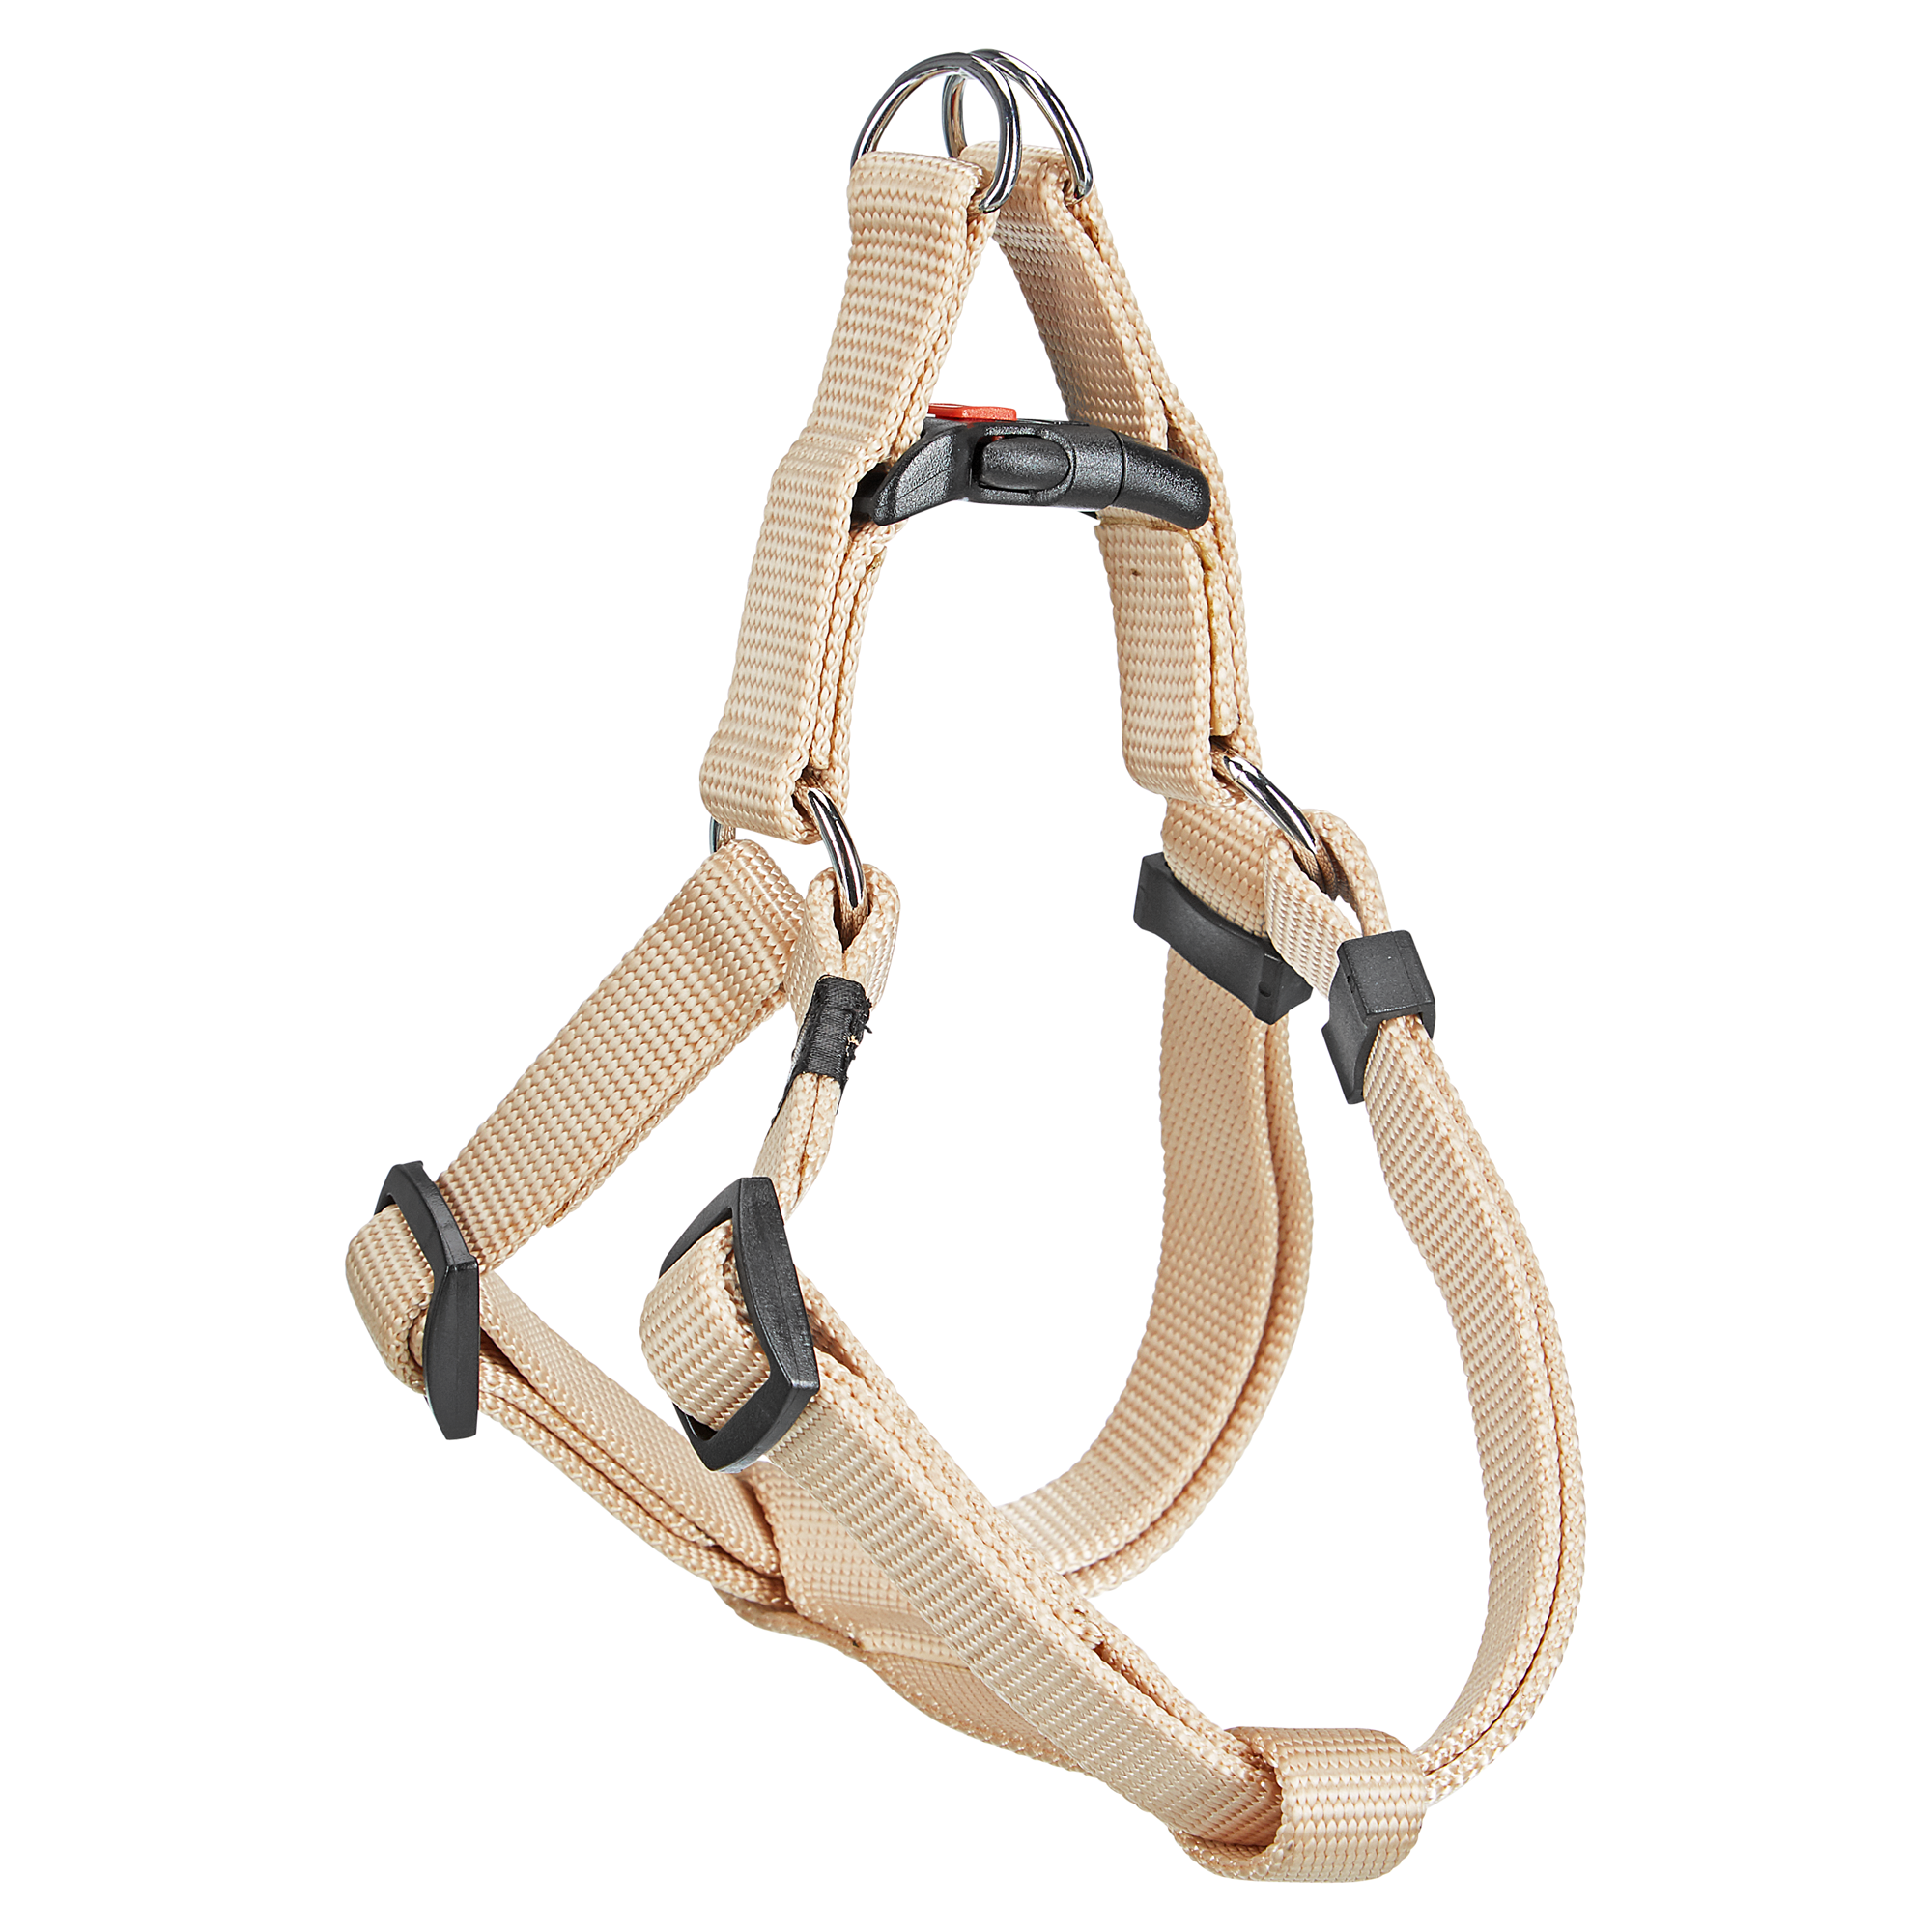 Hundegeschirr "Art Sportiv Plus Step and Go" beige 25 - 45 cm + product picture